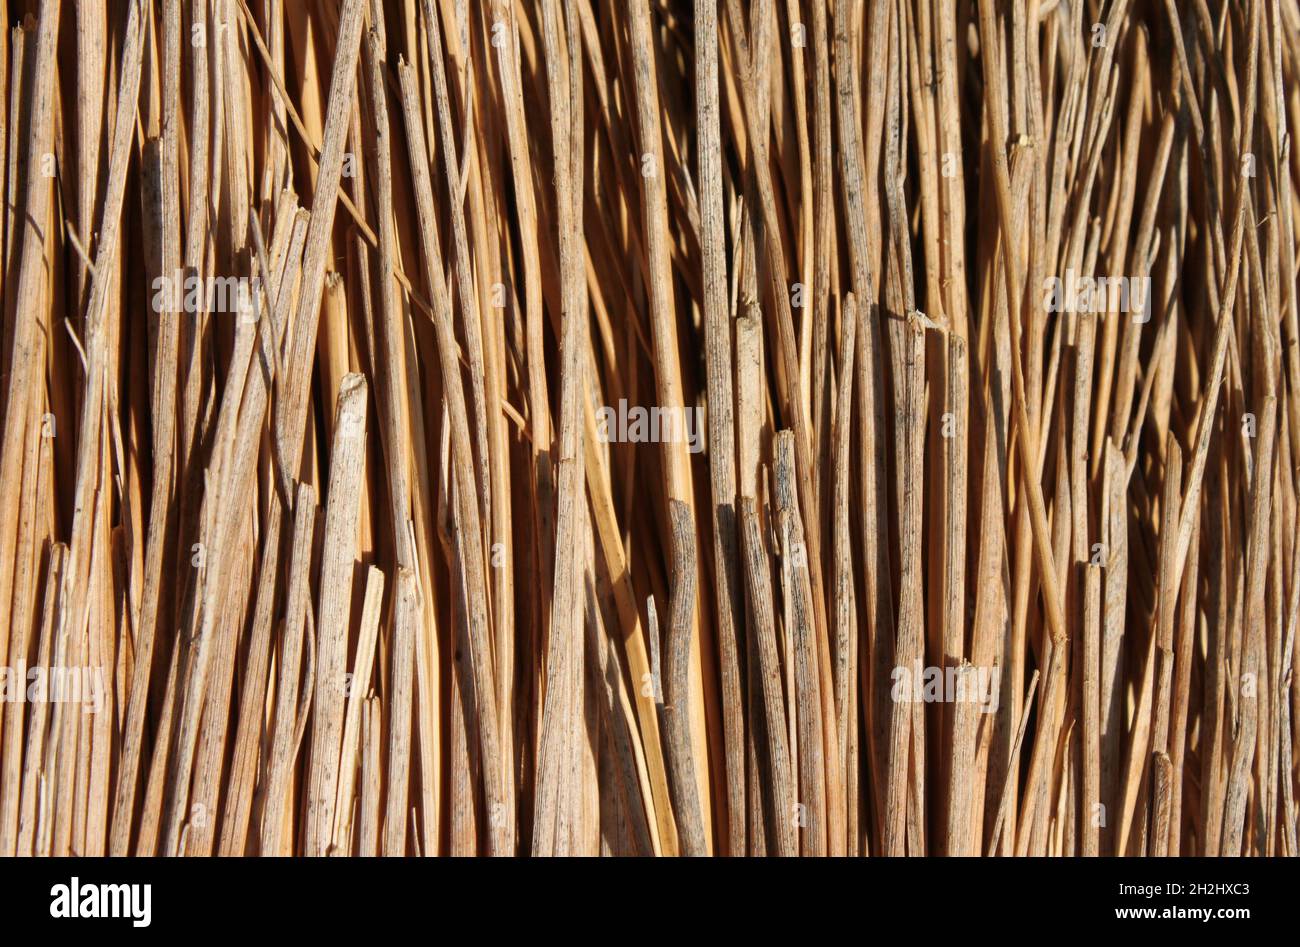 close up of a straw broom Stock Photo